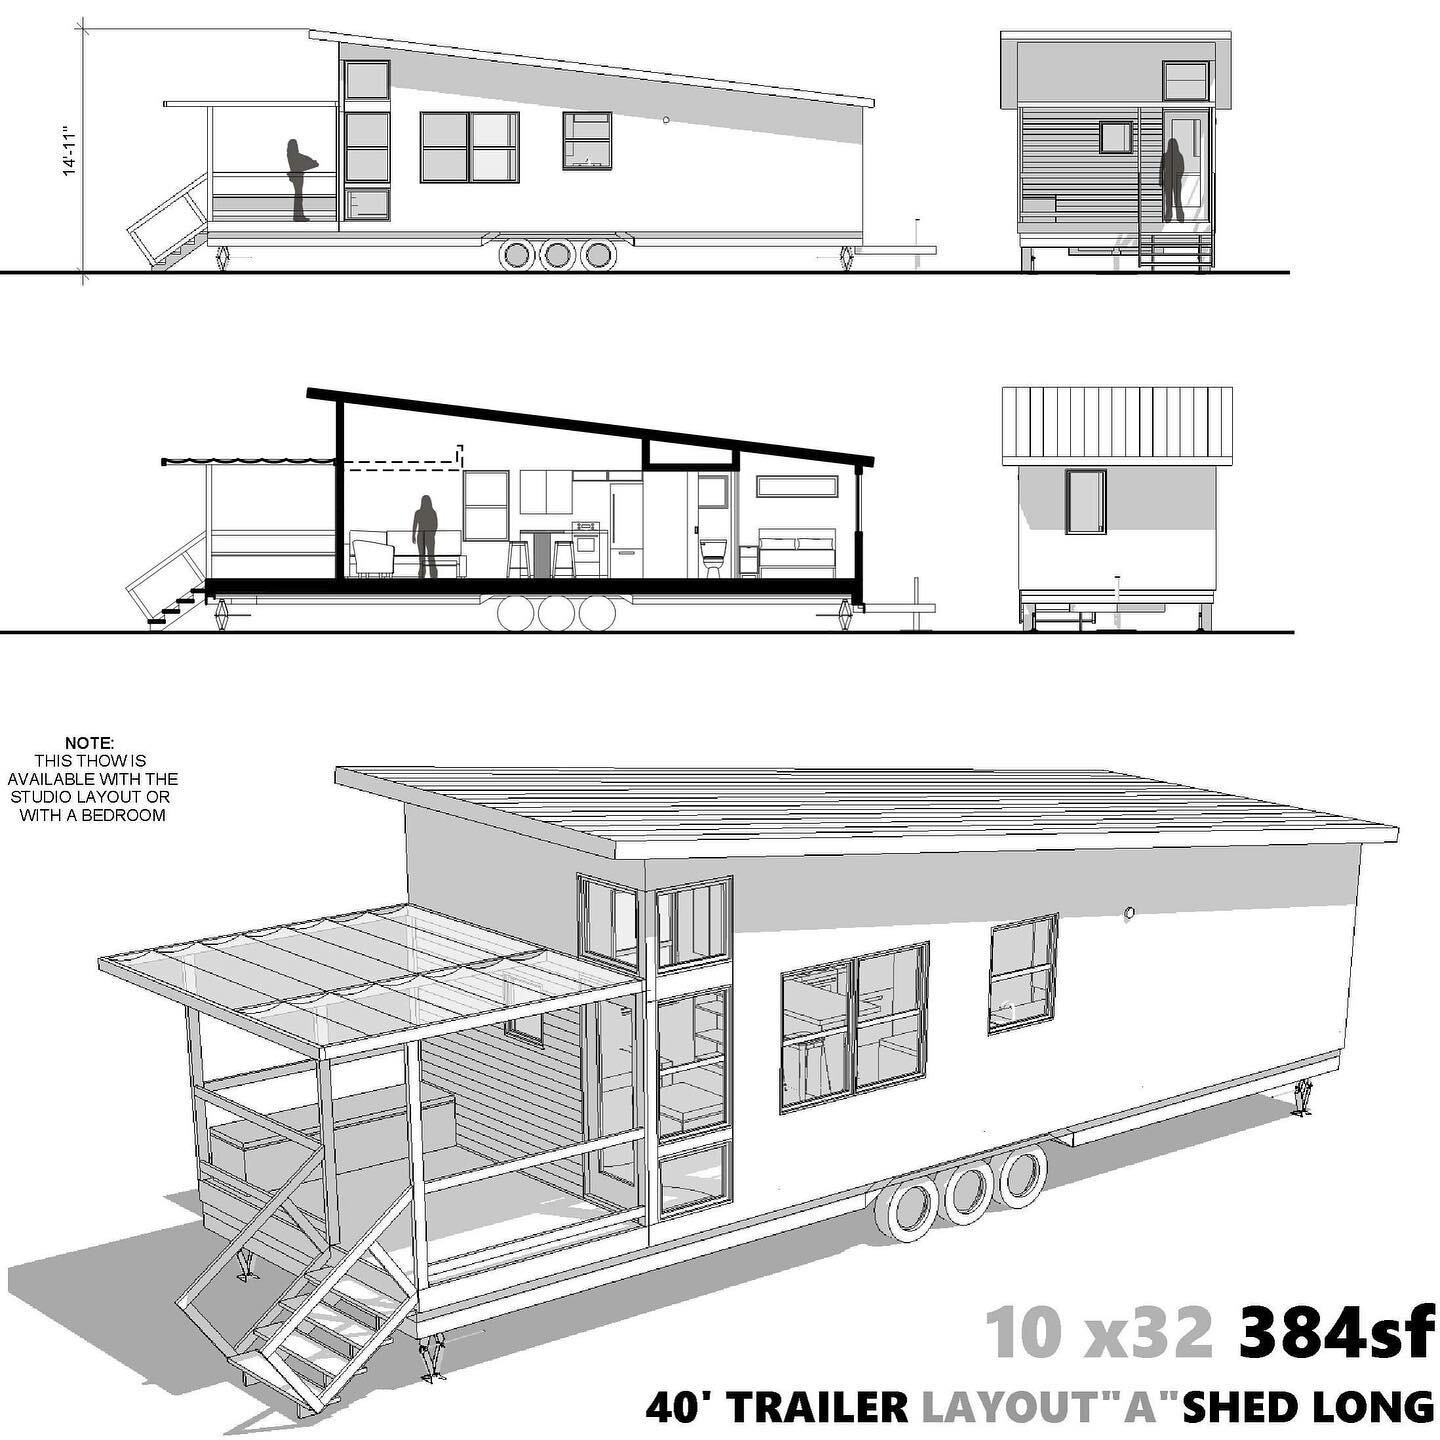 LivLab offers a larger THOW! Our 12x32 house now comes on a 40&rsquo; trailer! Check in on our site for prices.